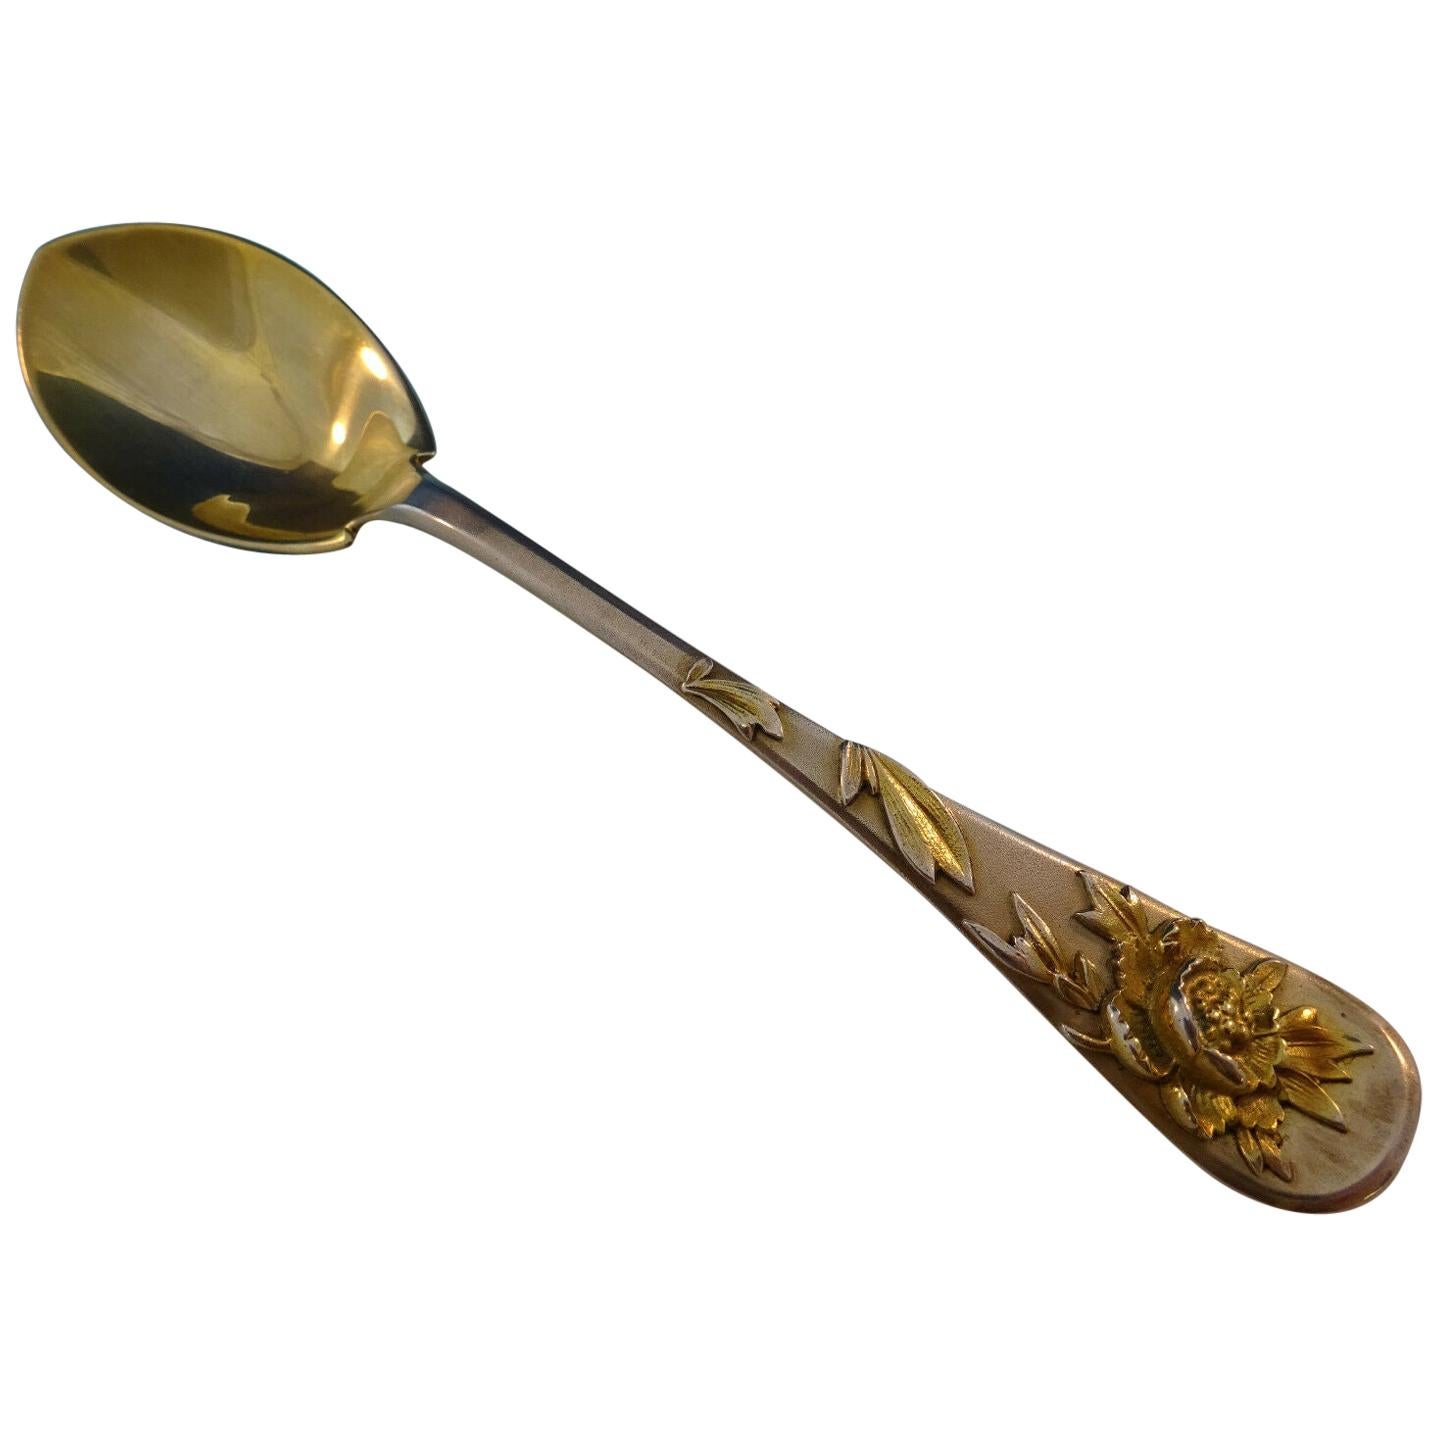 Tiffany & Co. Sterling Silver Ice Cream Spoon with Applied Flowers, circa 1880s